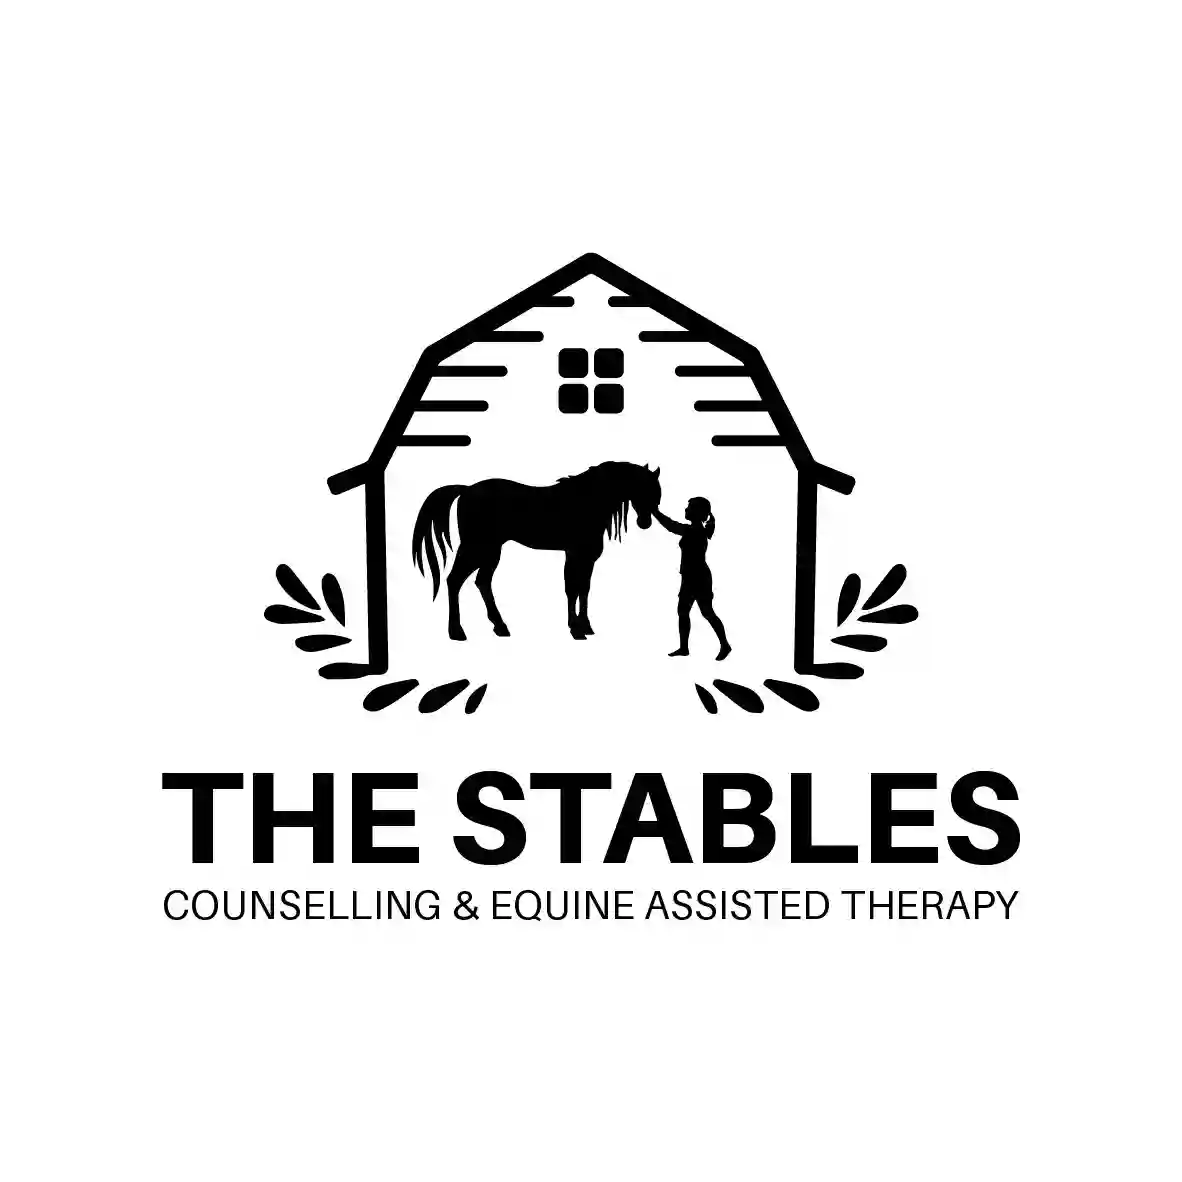 The Stables Counselling & Equine Assisted Therapy